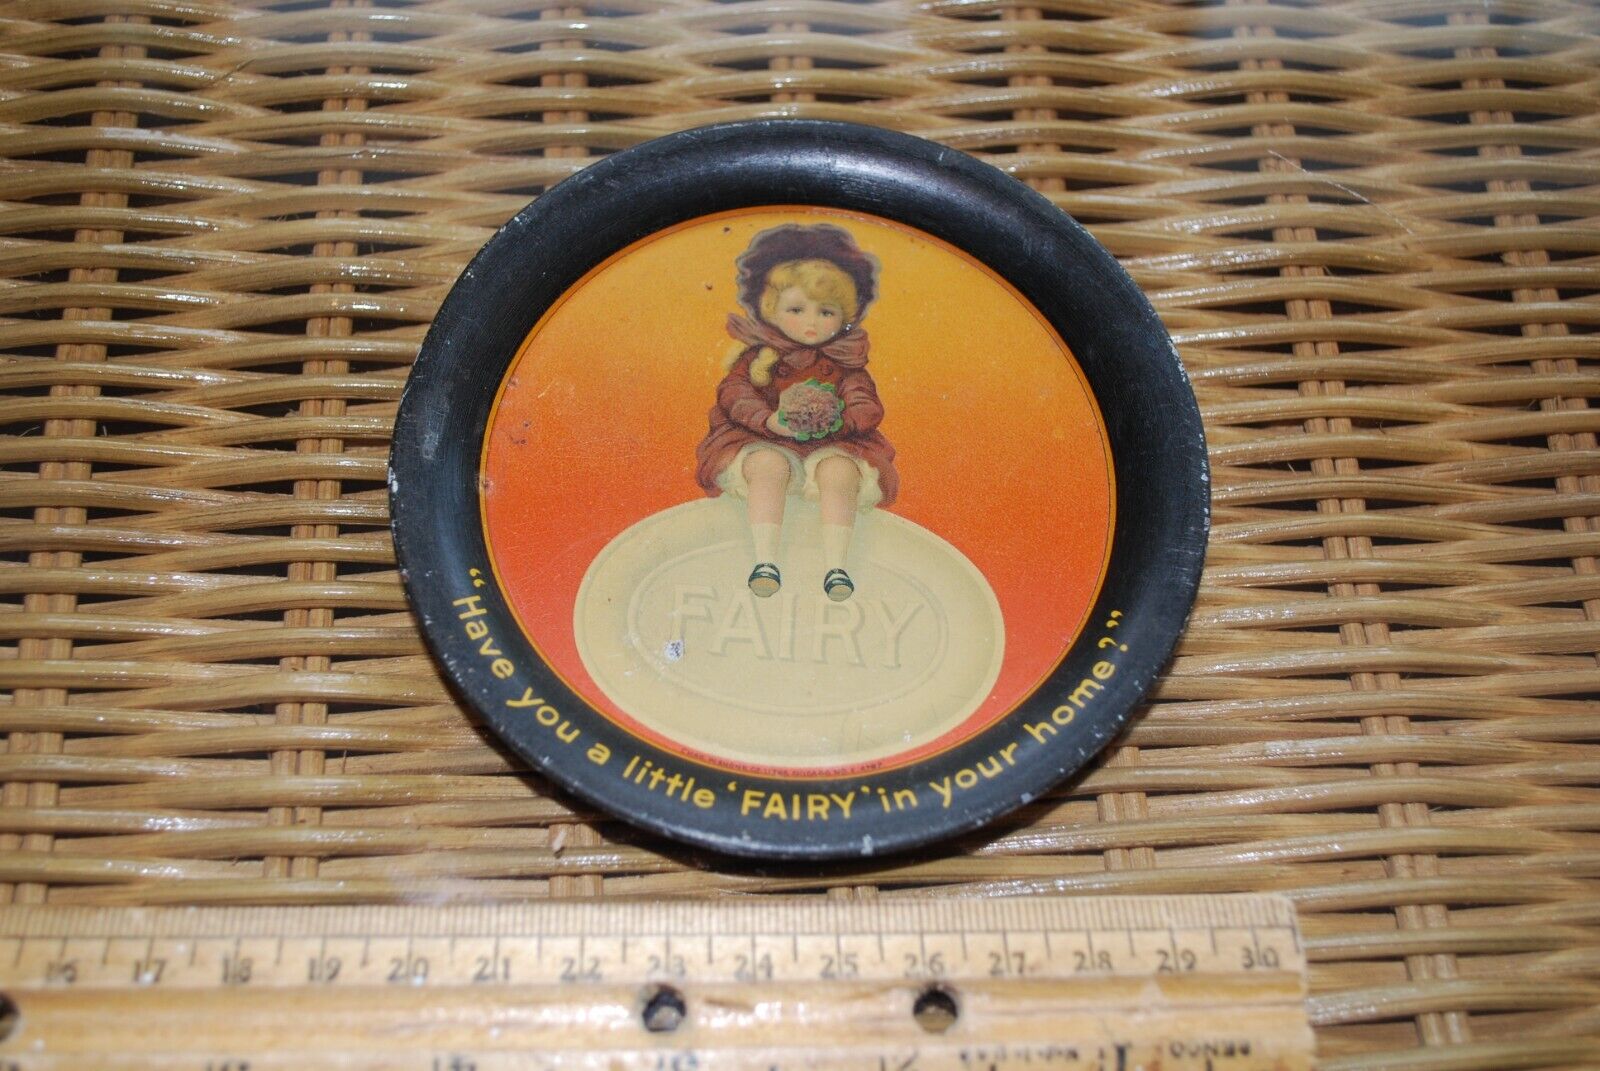 ANTIQUE EARLY 1900 FAIRY SOAP TIP TRAY GREAT ADVERTISEMENT BACK FAIRBANK CO.